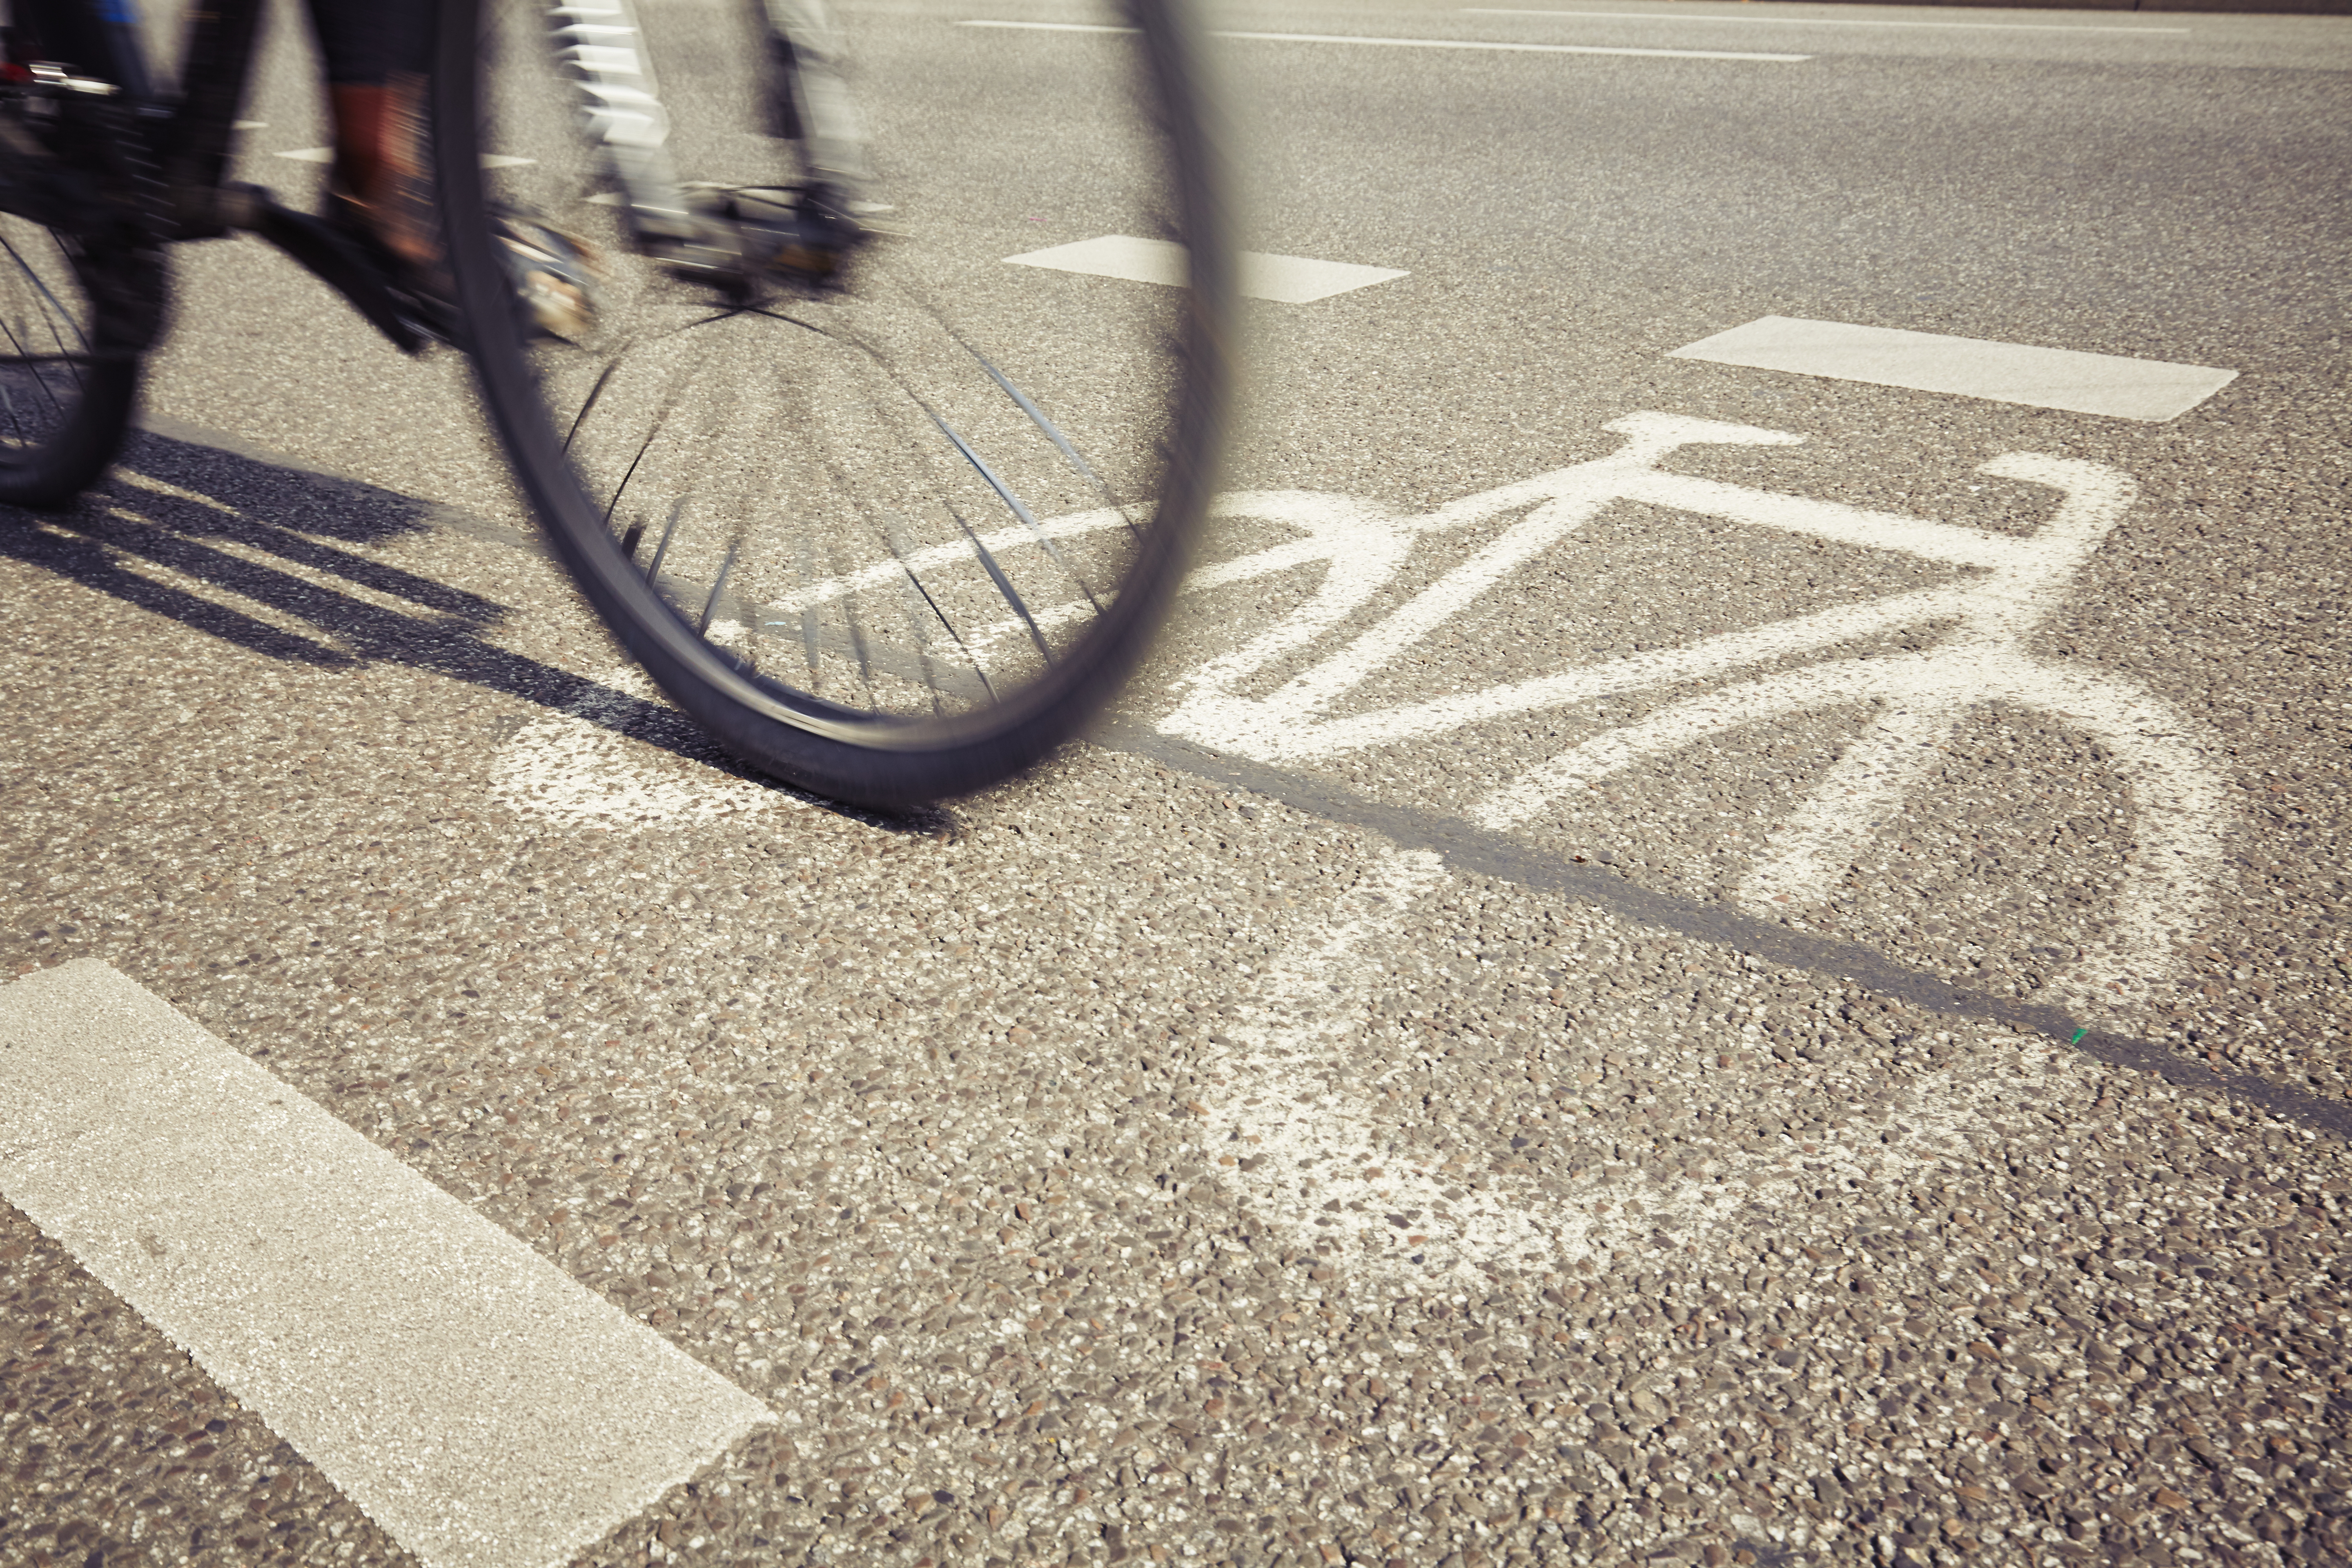 ‘Unworkable’: Push for cyclists to have one metre gap on the road